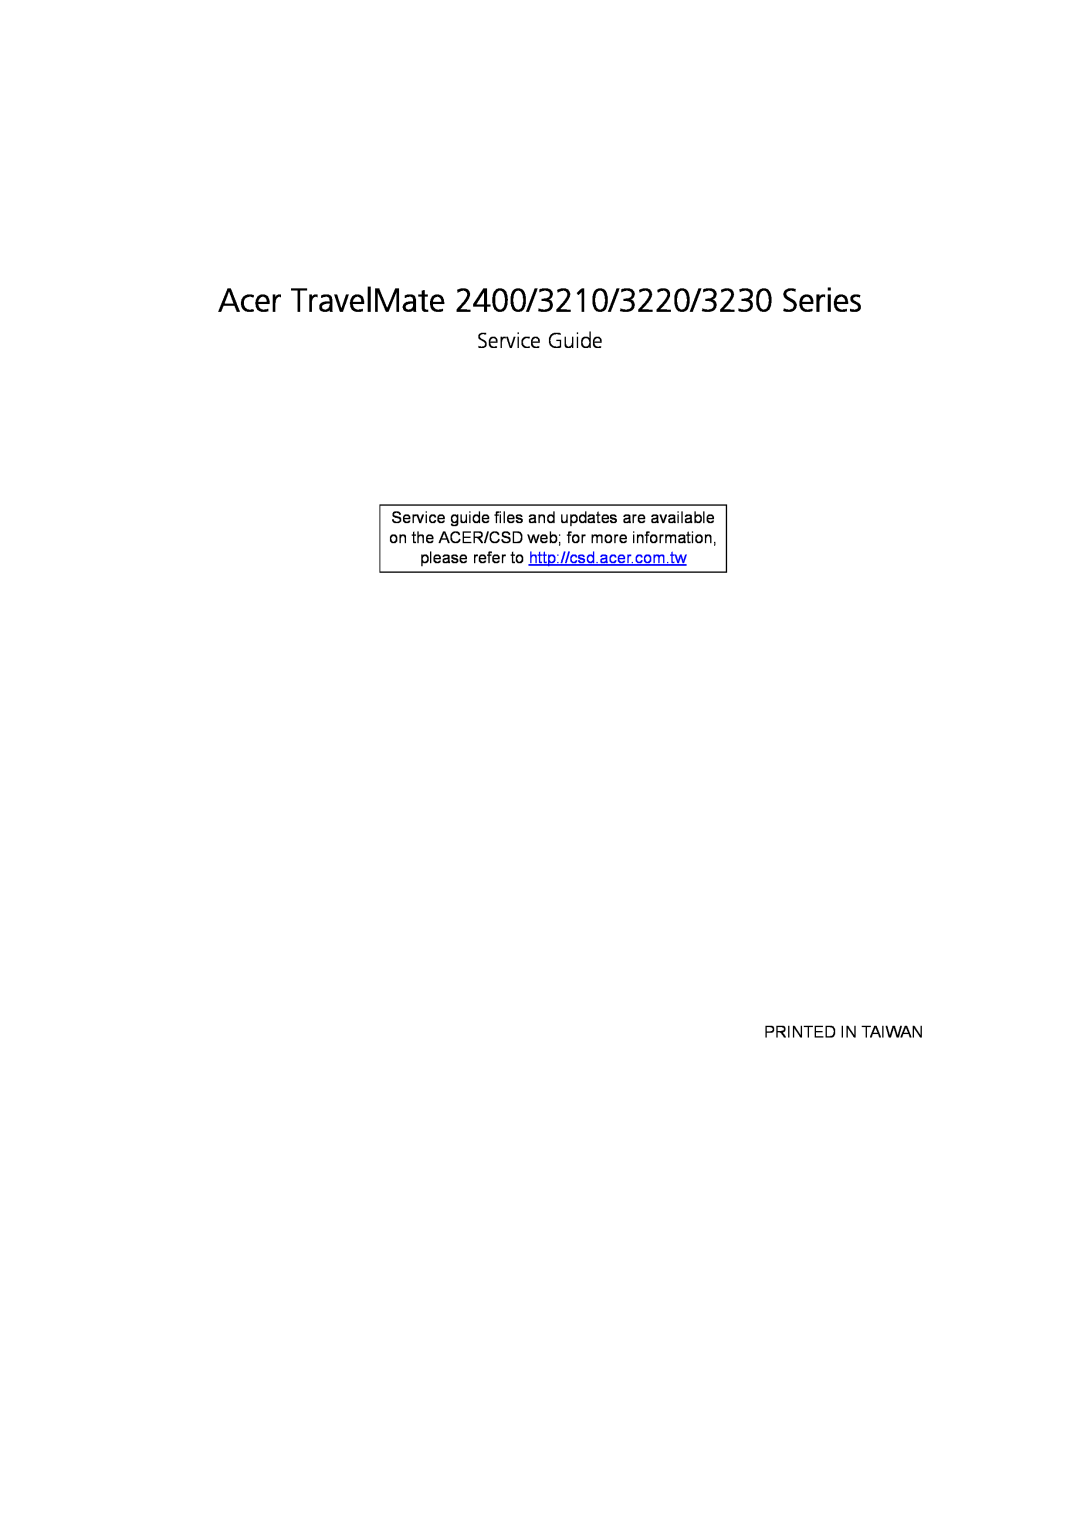 Acer manual Service Guide, Acer TravelMate 2400/3210/3220/3230 Series 